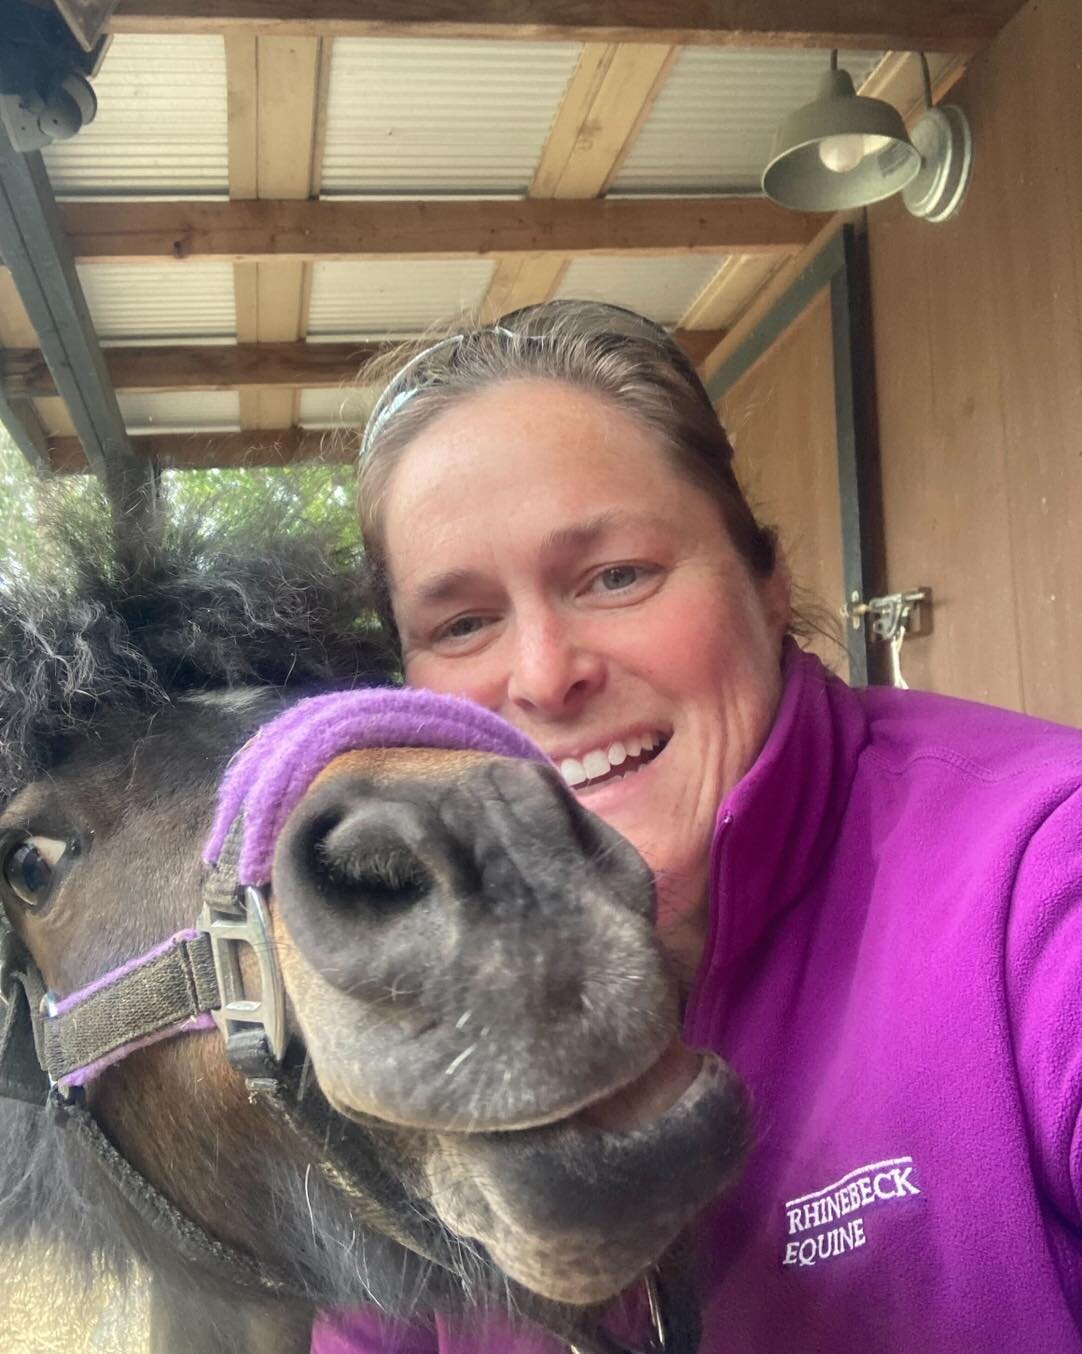 We will say today is Selfie Saturday! We think it is safe to say that our veterinarians truly love their patients. Here is Dr. Shores taking a selfie with Shadow. 

#ambulatoryvet #equinevet #equineambulatoryvetlife #equineambulatoryvet #equinespecia